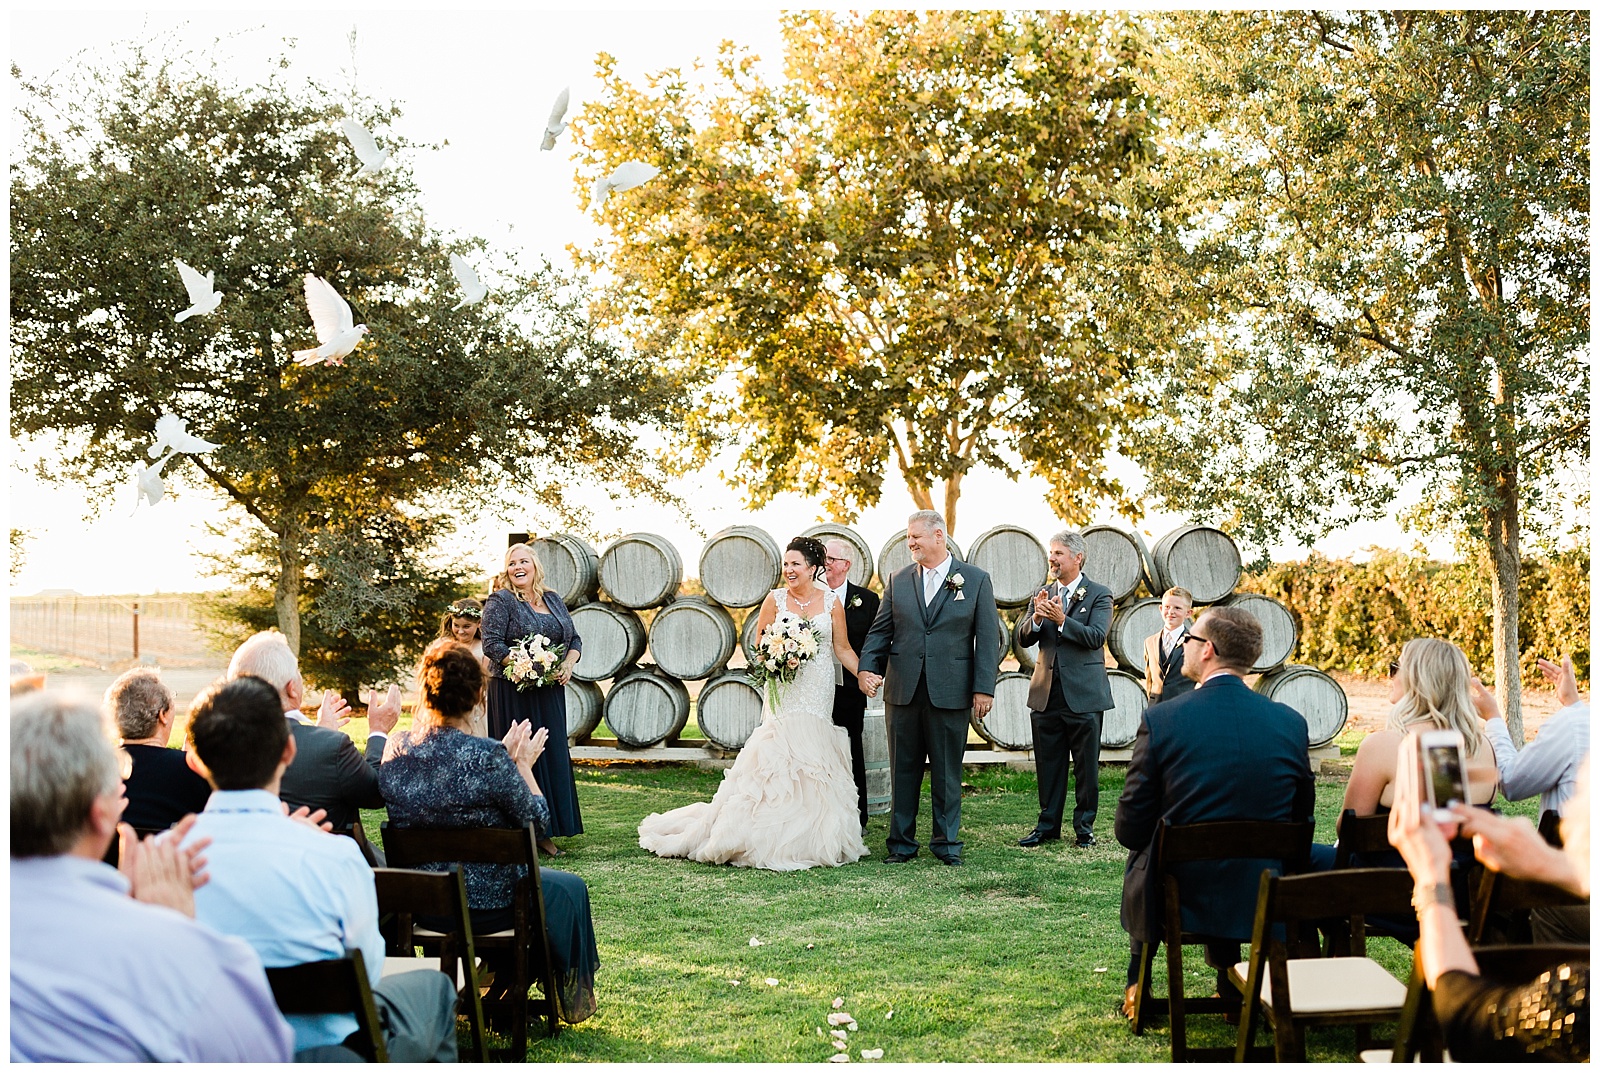 dove release at a vineyard wedding ceremony